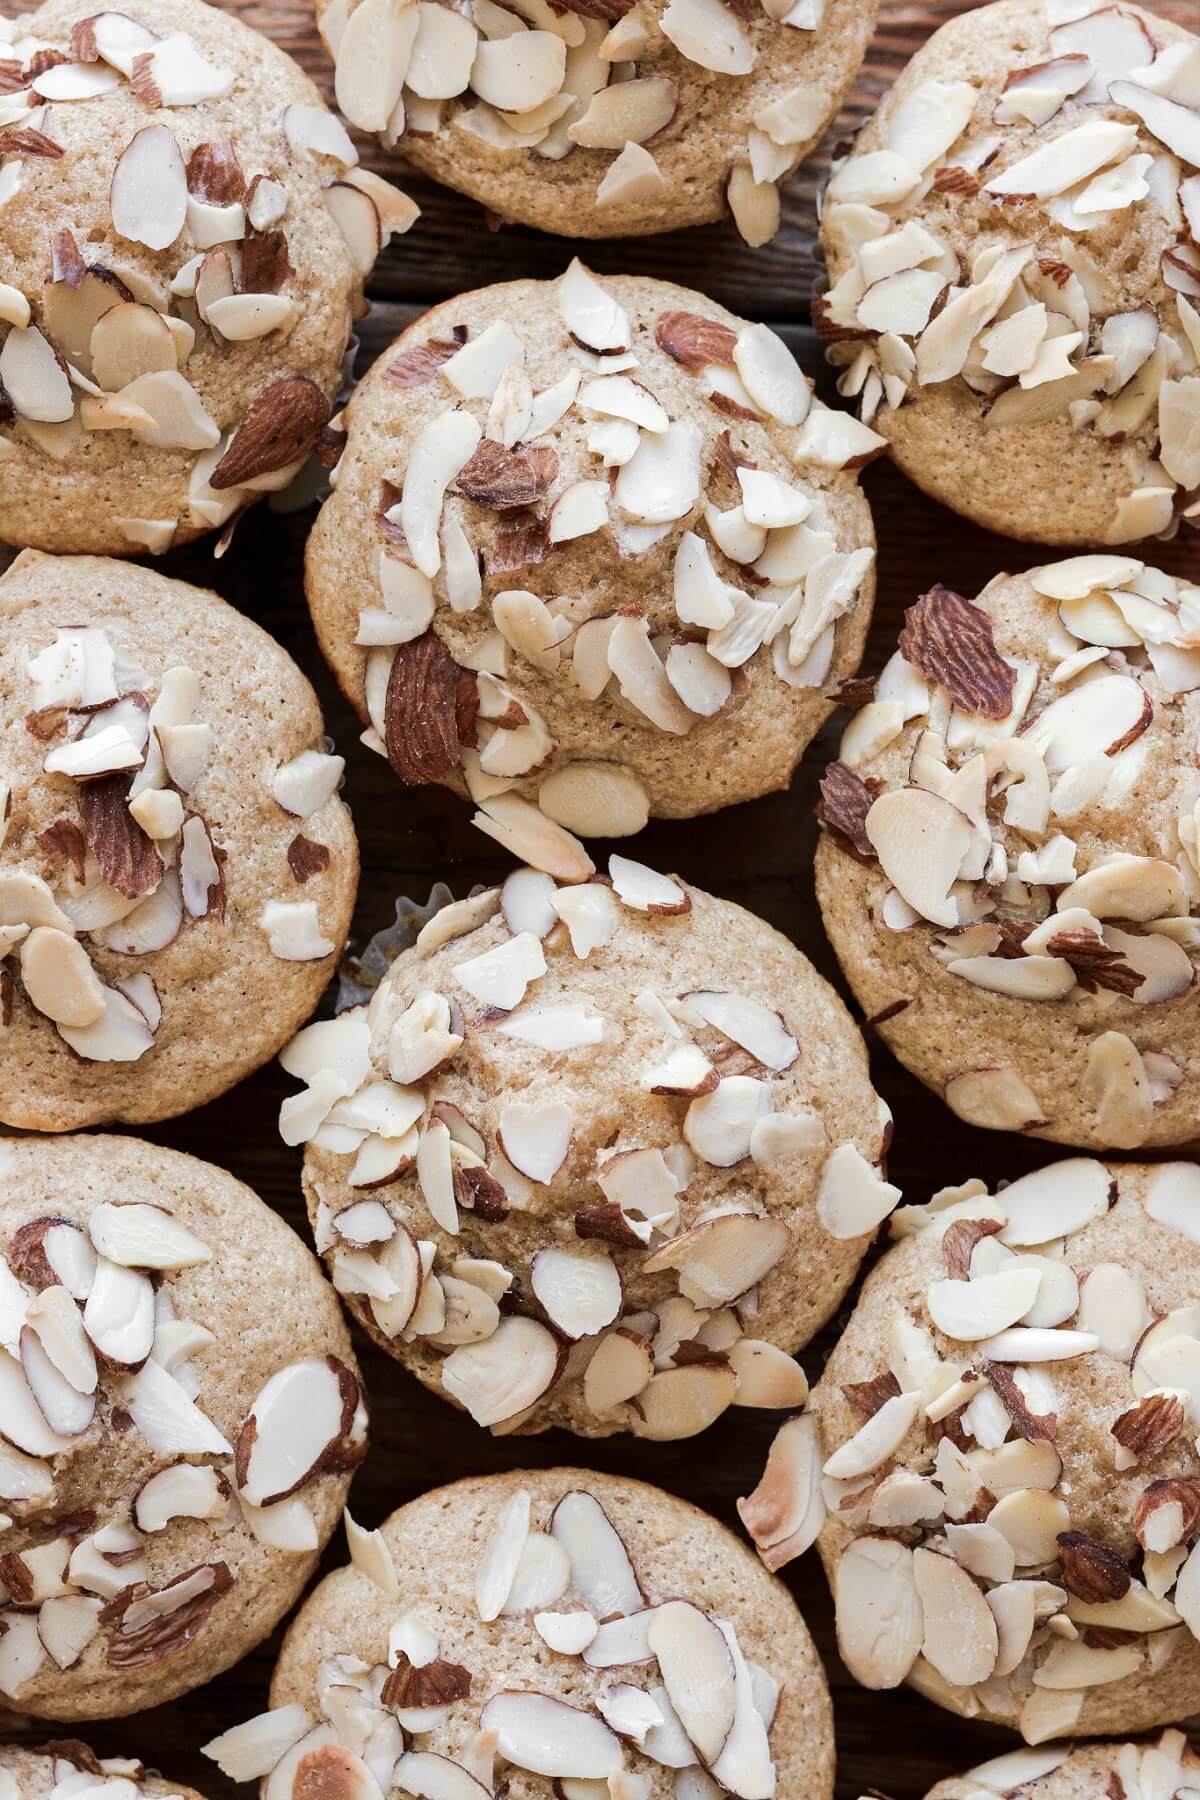 Almond muffins topped with sliced almonds.